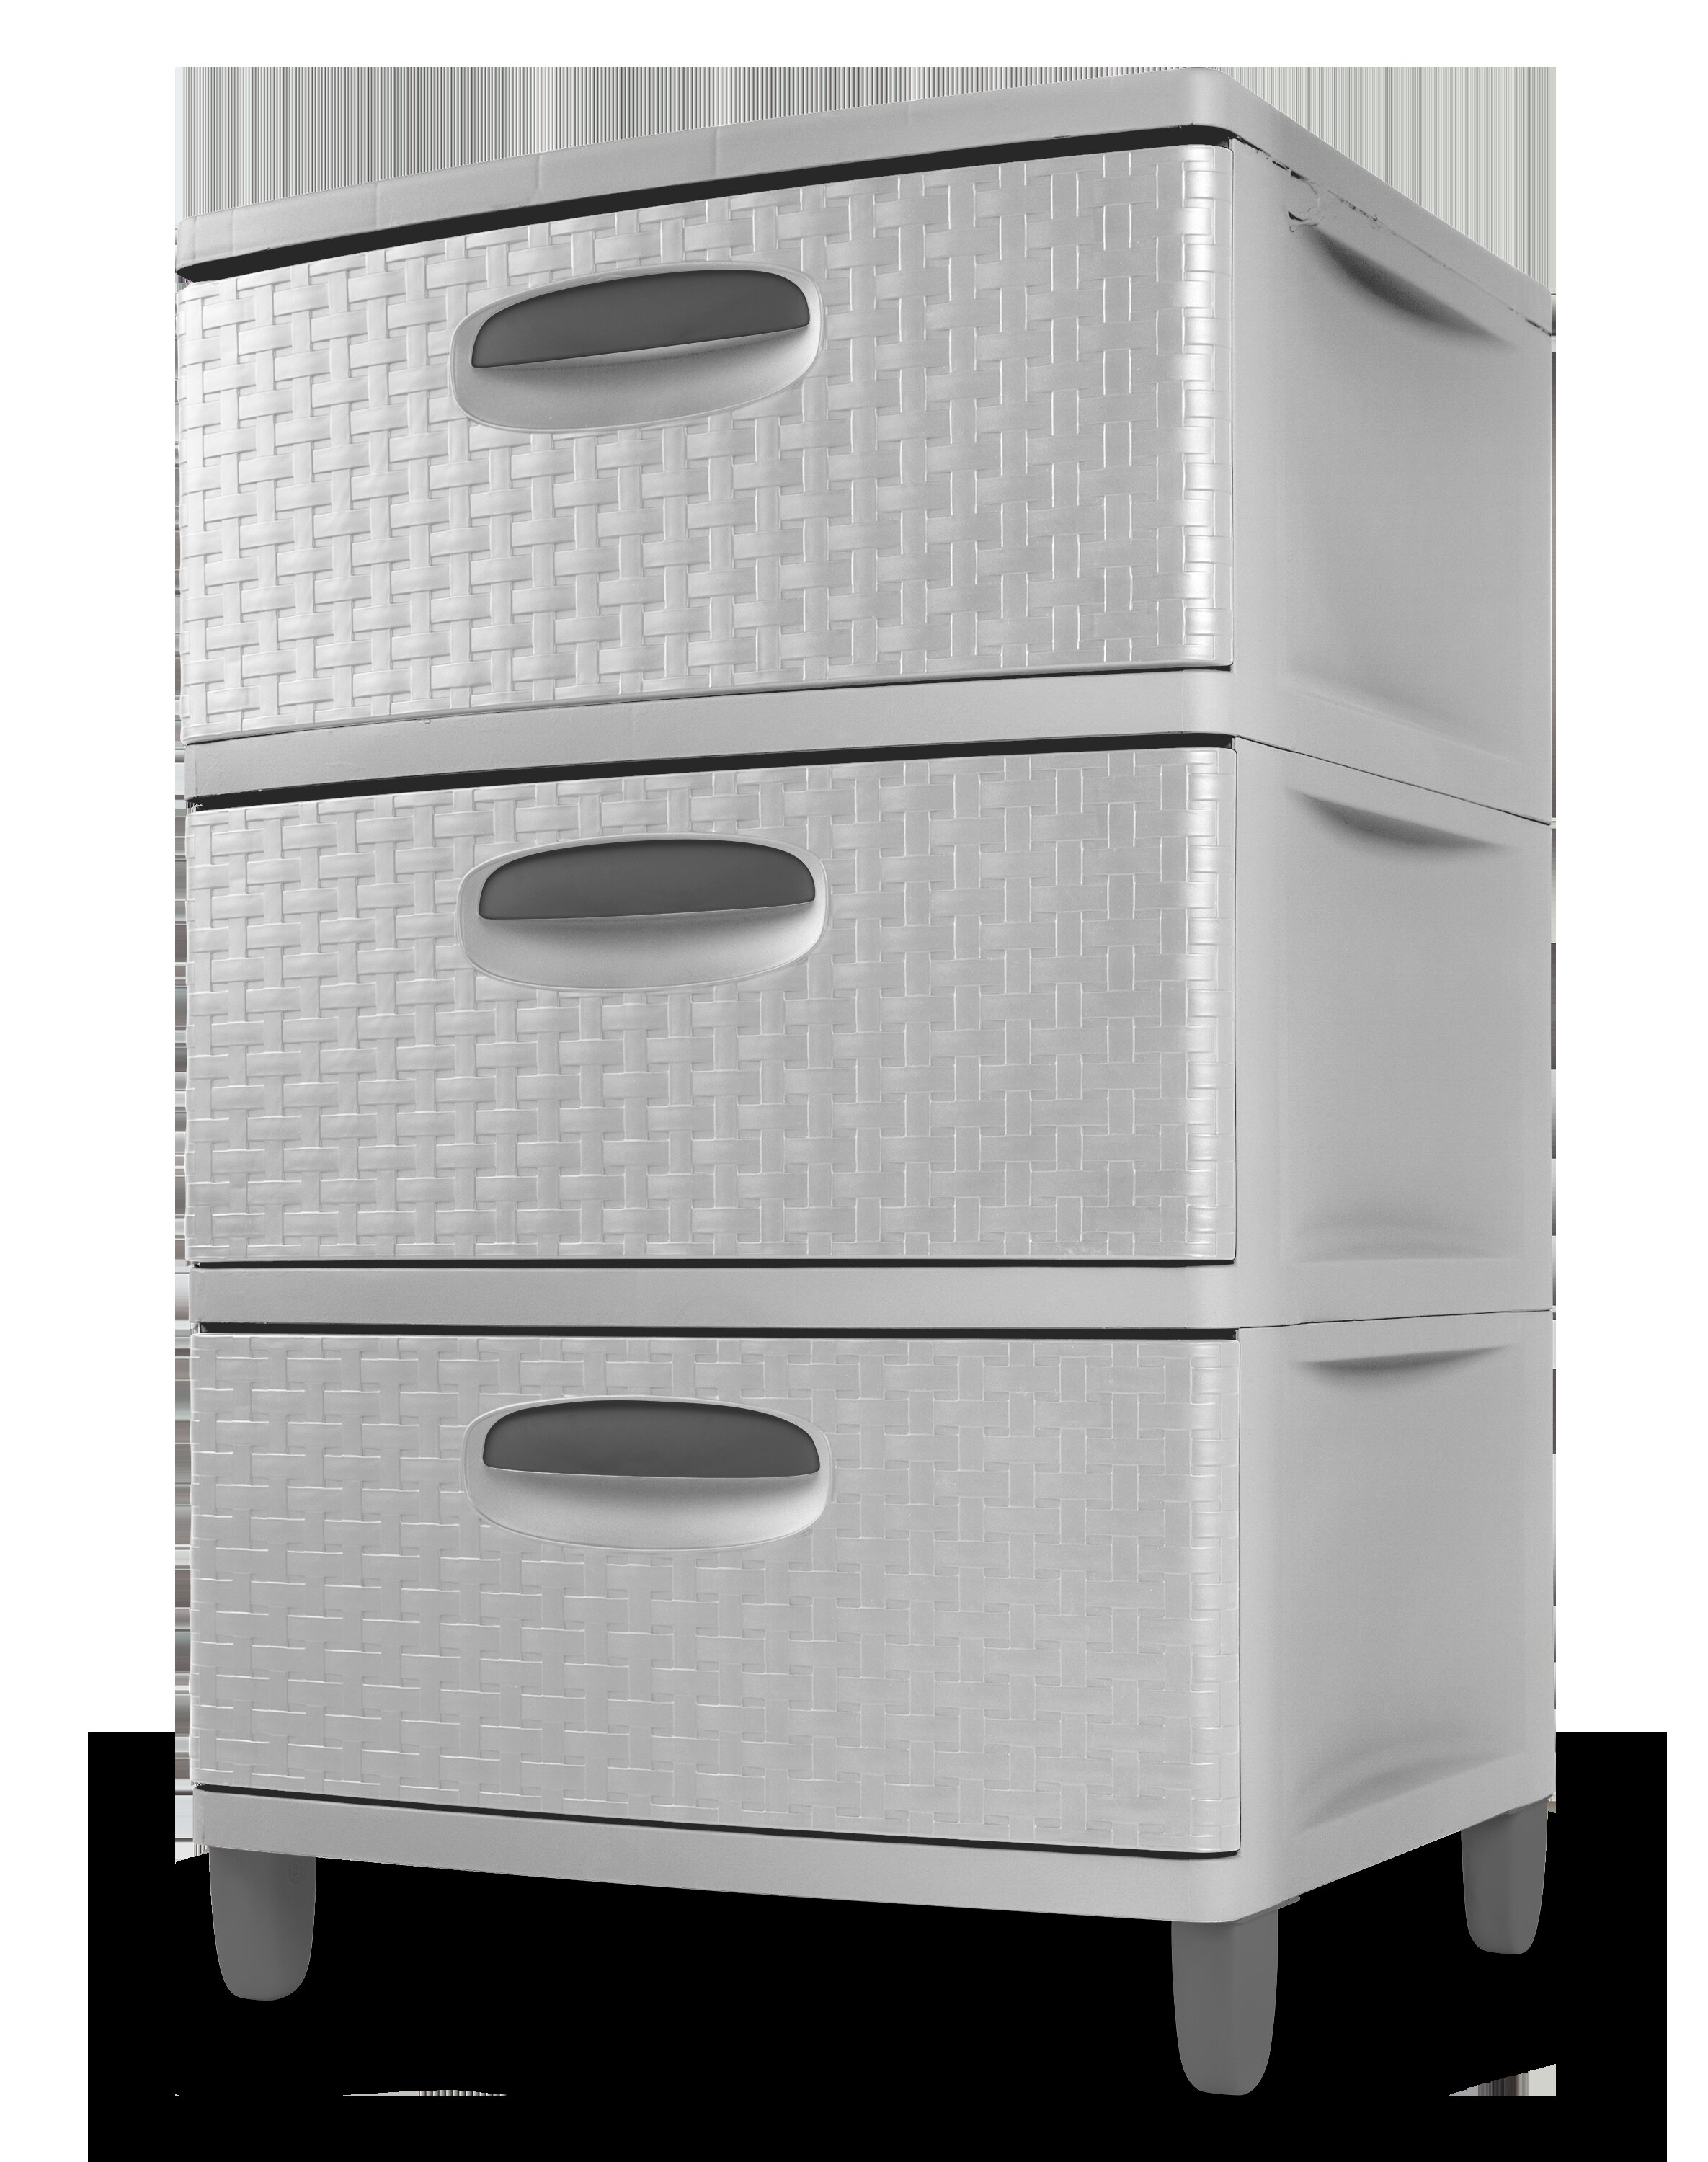 Home Office Plastic 4 Drawer Storage Tower White and Grey